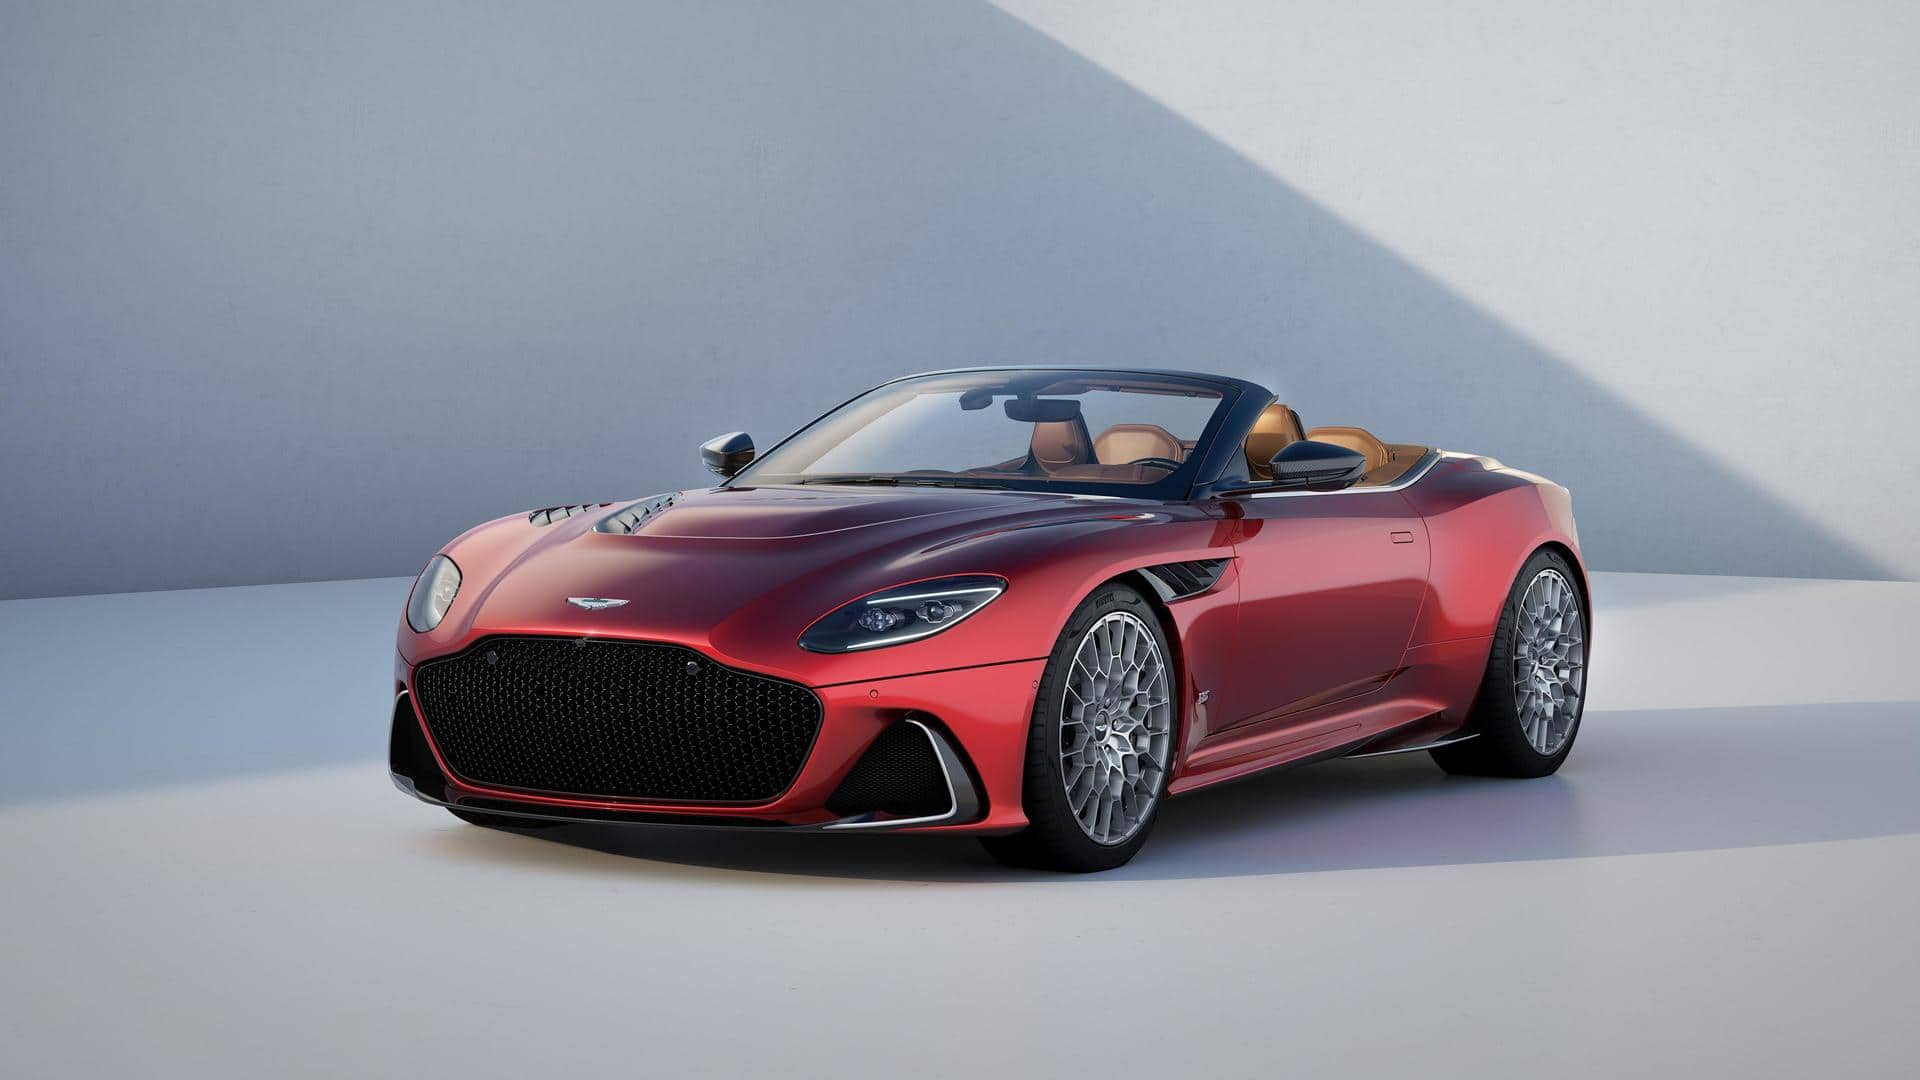 Aston Martin introduces its most powerful production car ever